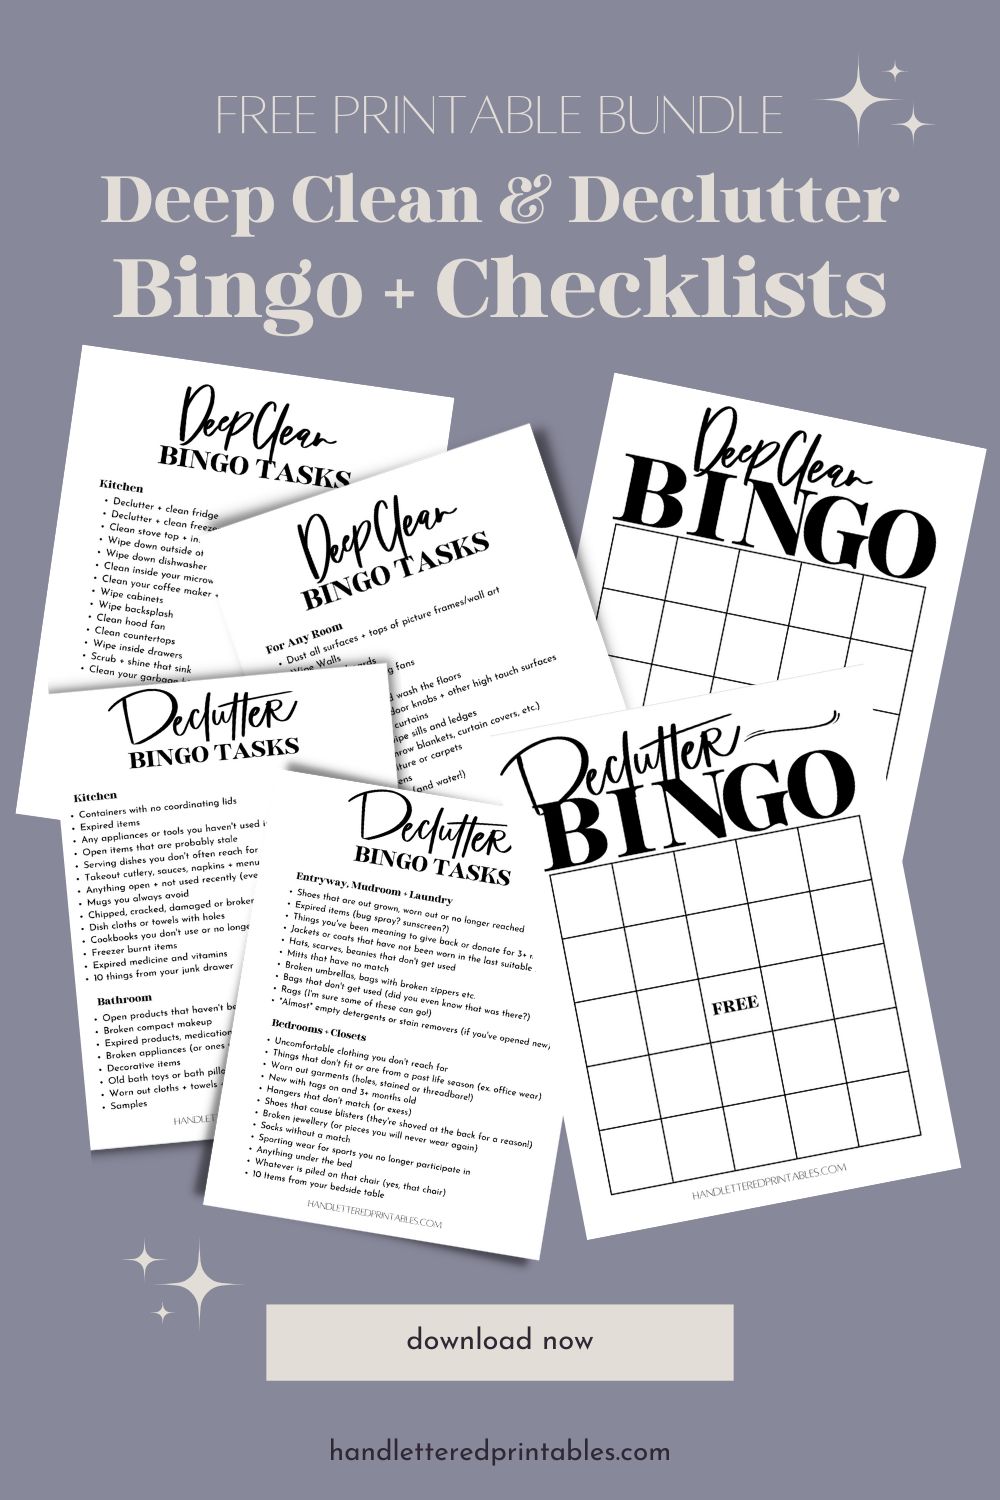 Free Printable Bundle for Deep Clean and Declutter Bingo with Checklists (mockup of printed pages with text over)